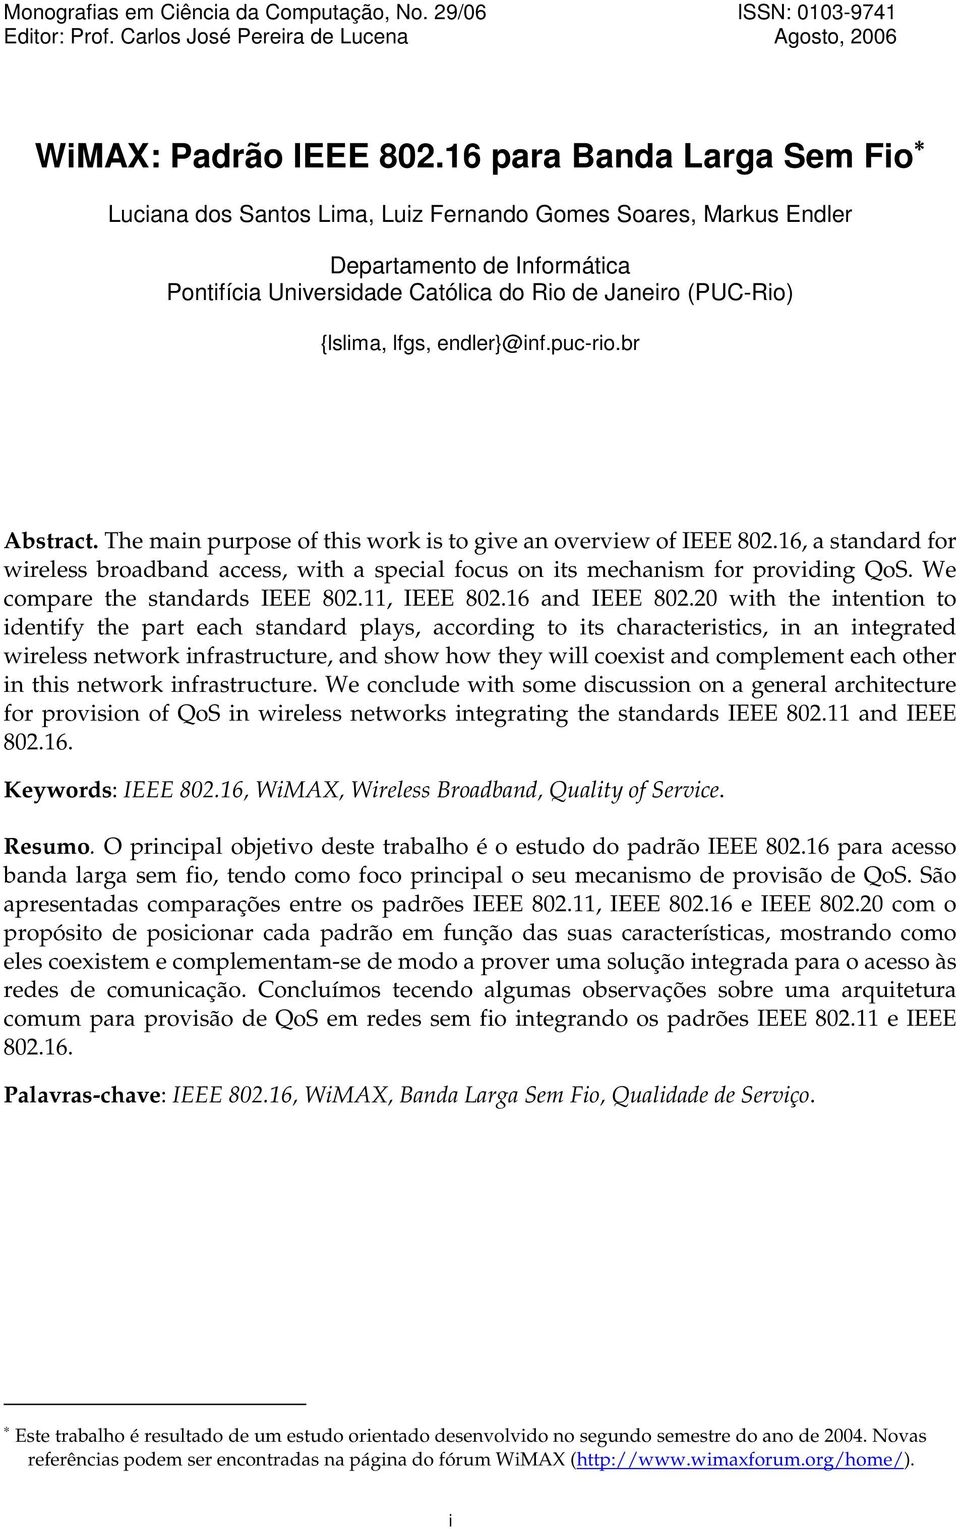 endler}@inf.puc-rio.br Abstract. The main purpose of this work is to give an overview of IEEE 802.16, a standard for wireless broadband access, with a special focus on its mechanism for providing QoS.